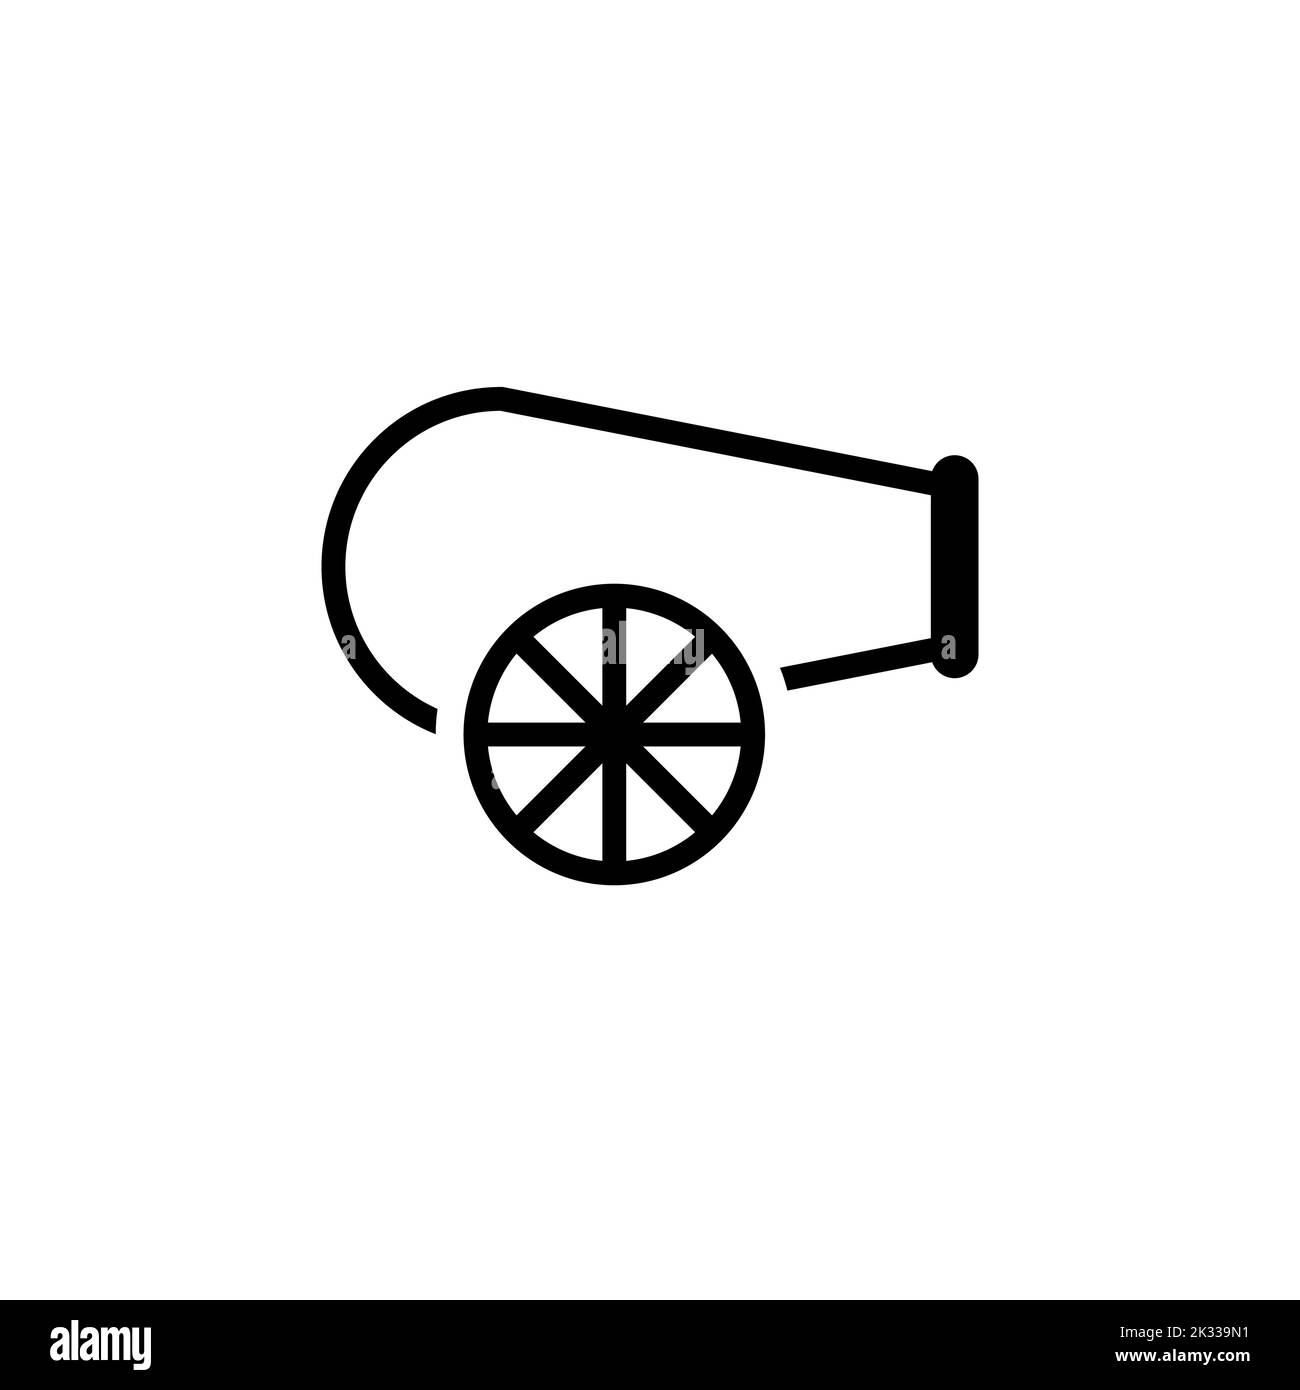 cannon icon vector illustration on white background. Stock Vector